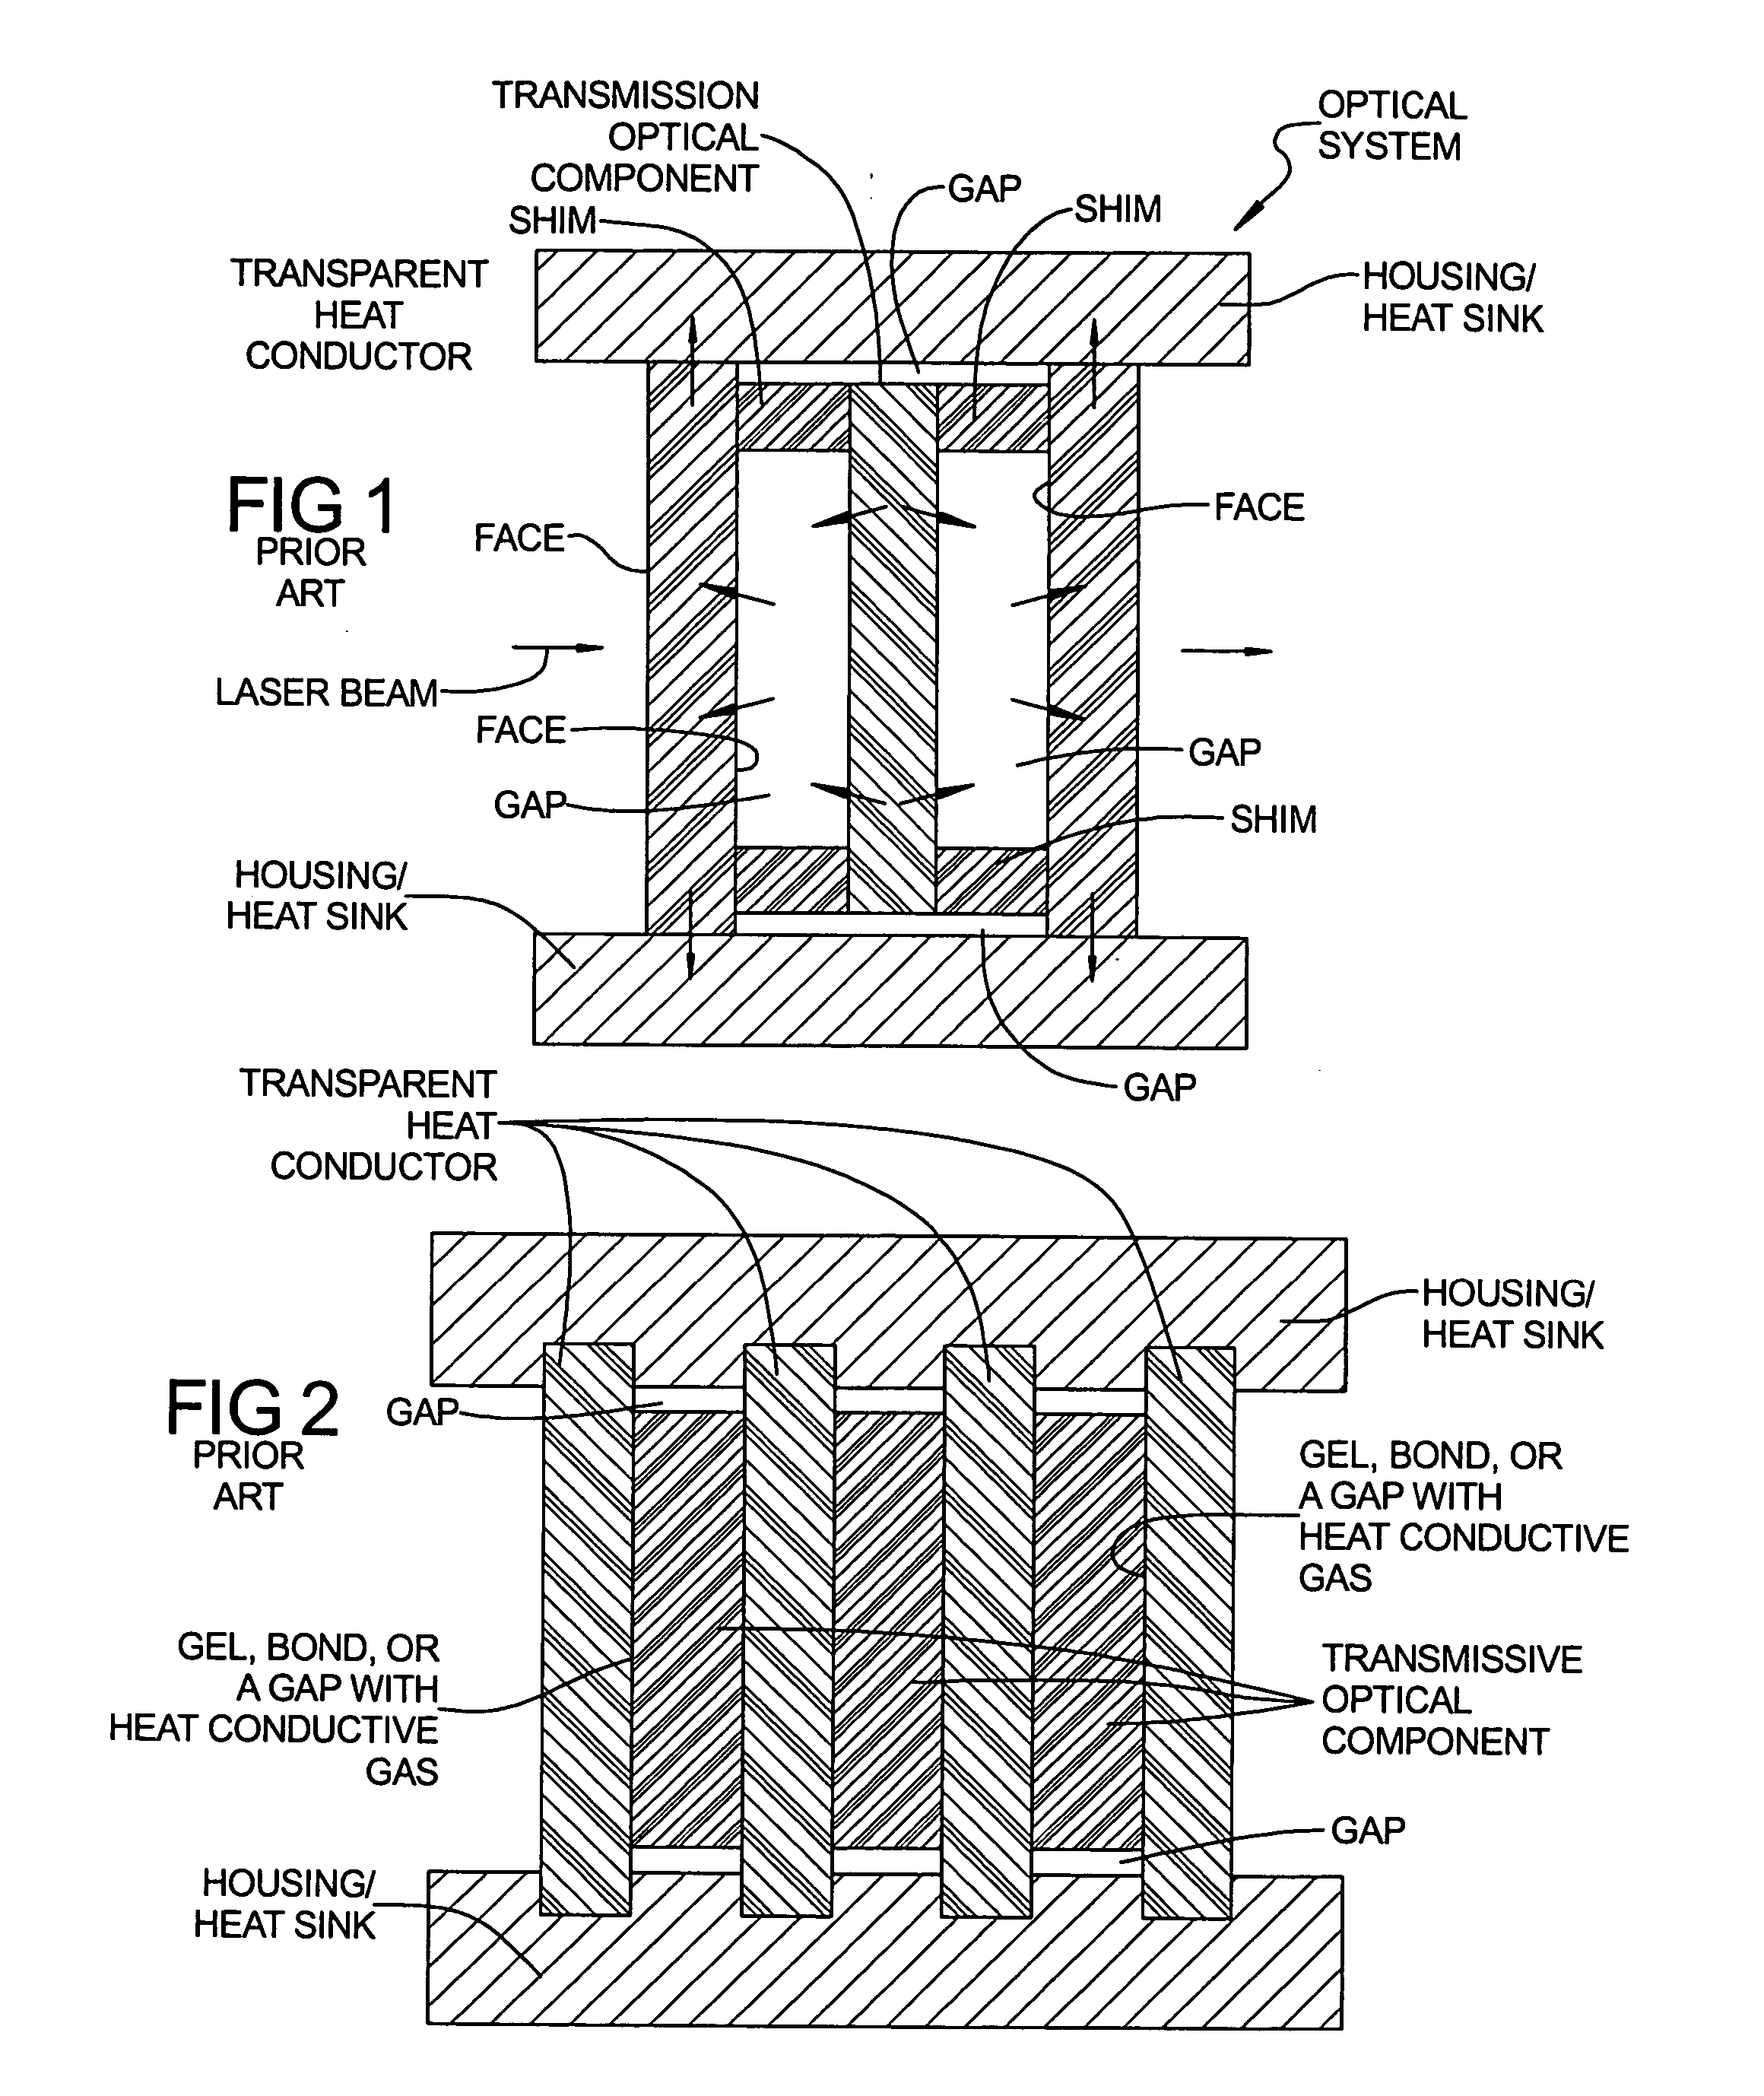 Apparatus and method for face cooling of optical components of a laser system